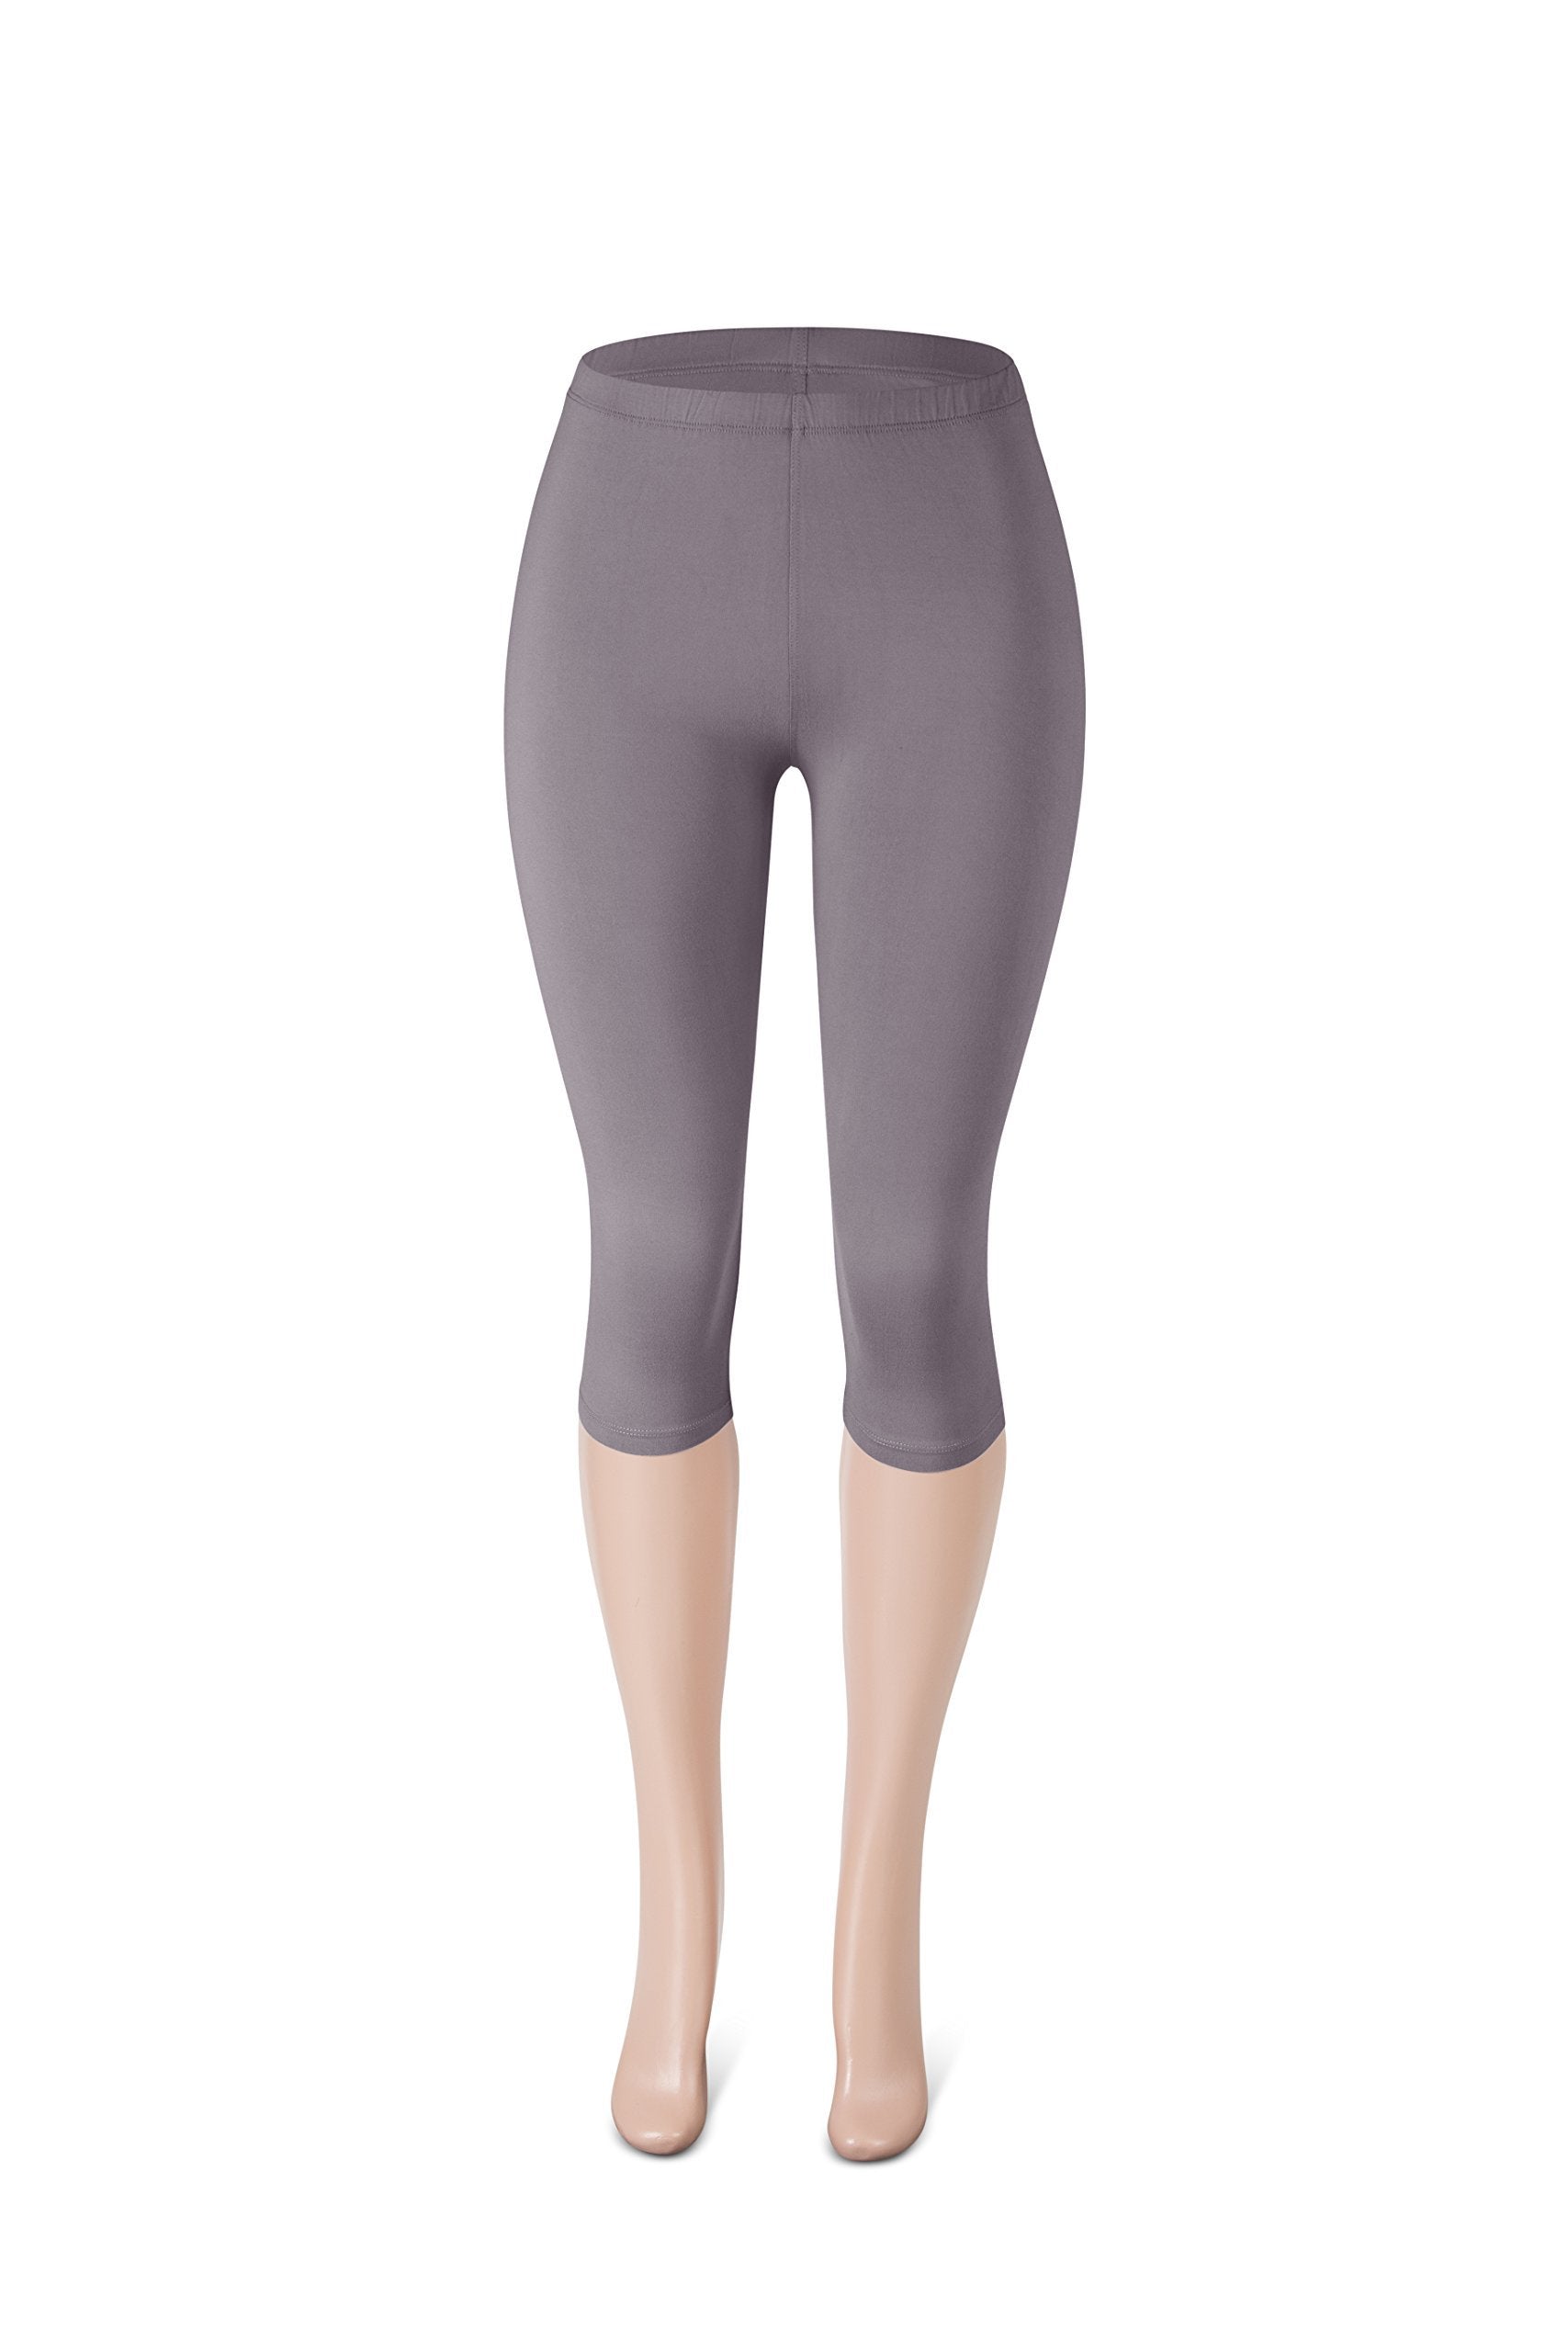 SATINA High Waisted Leggings for Women | Full Length | 1 Inch Waistband (Plus Size, Lilac Gray)